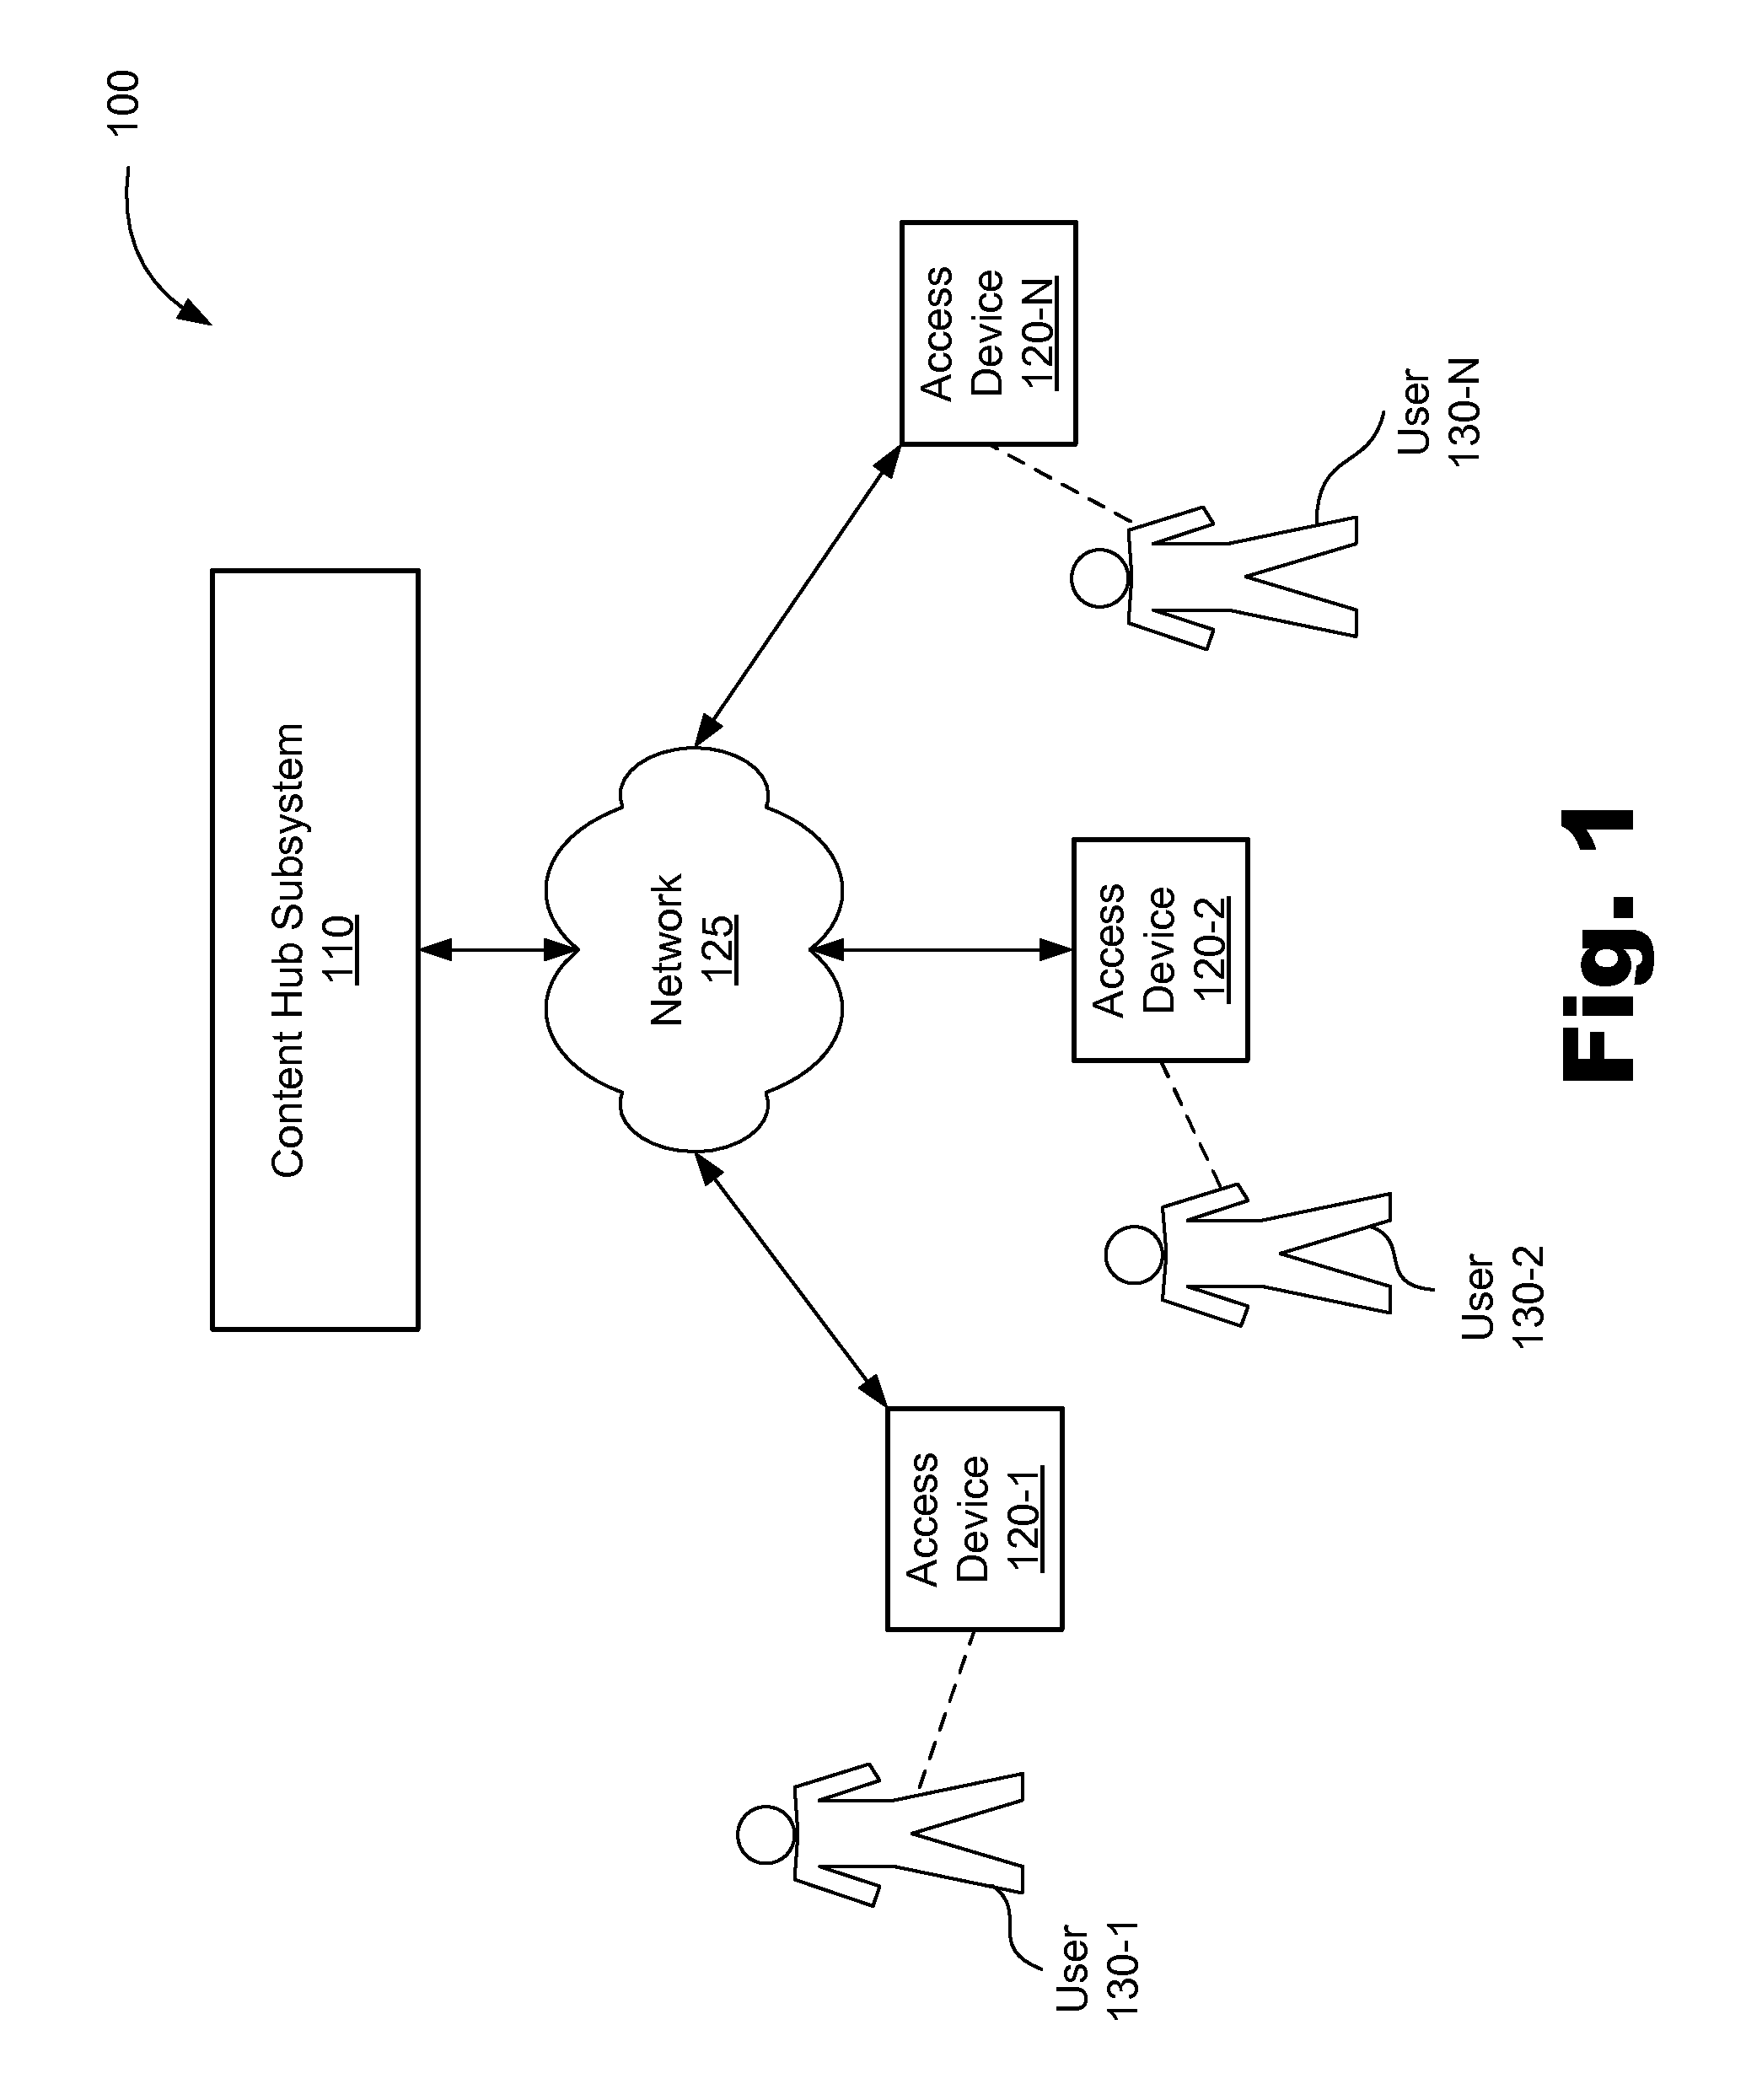 Location based content aggregation and distribution systems and methods